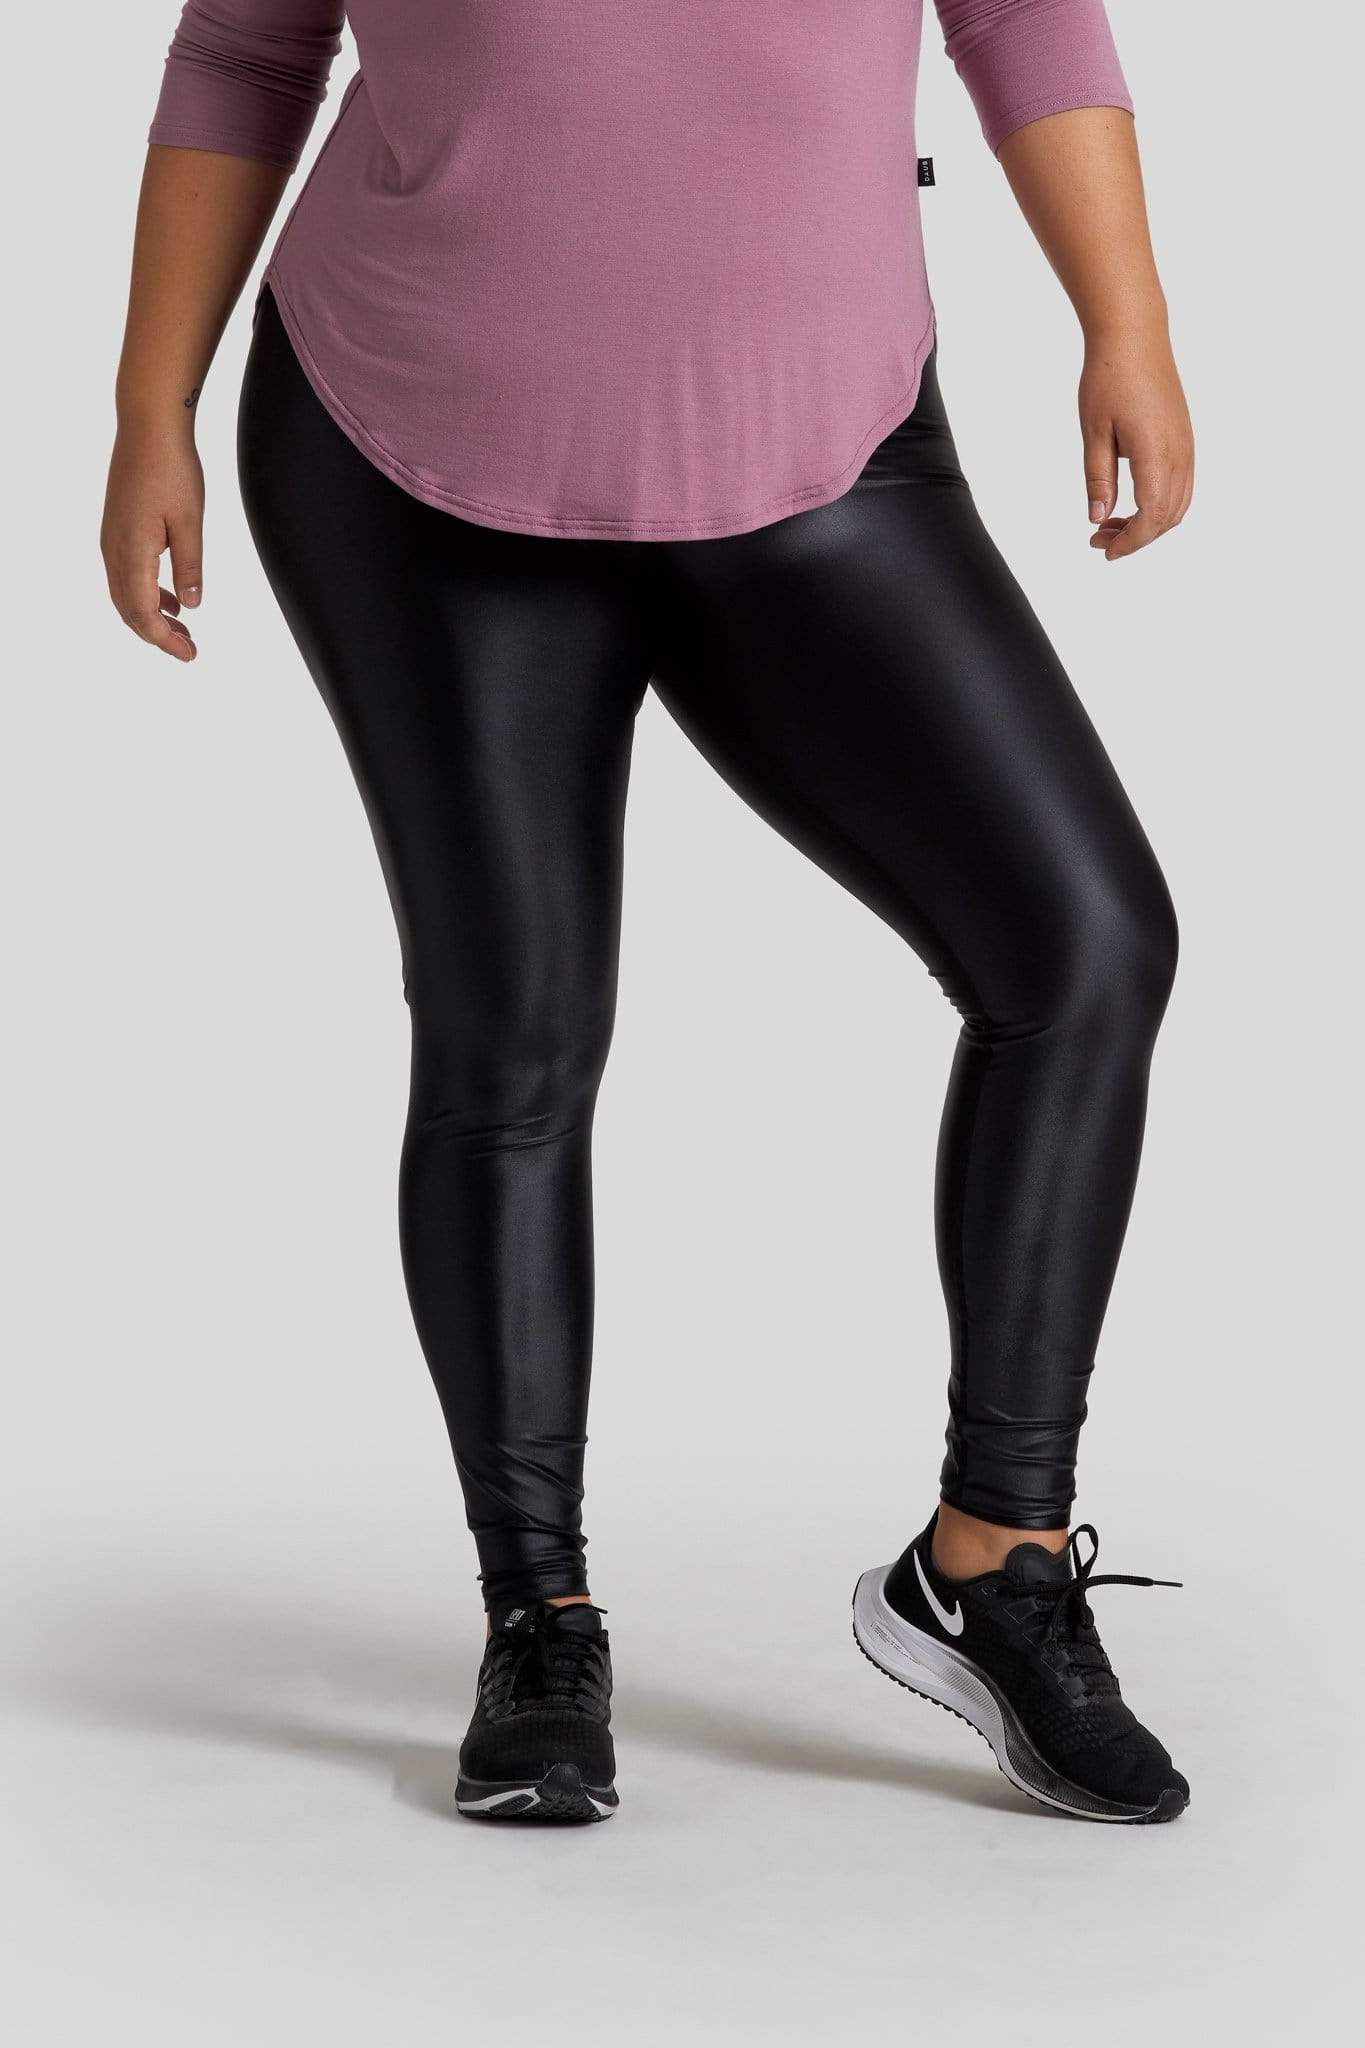 BLISSFUL BENEFITS NO MUFFIN TOP FOOTLESS XS BLACK Seamless Leggings